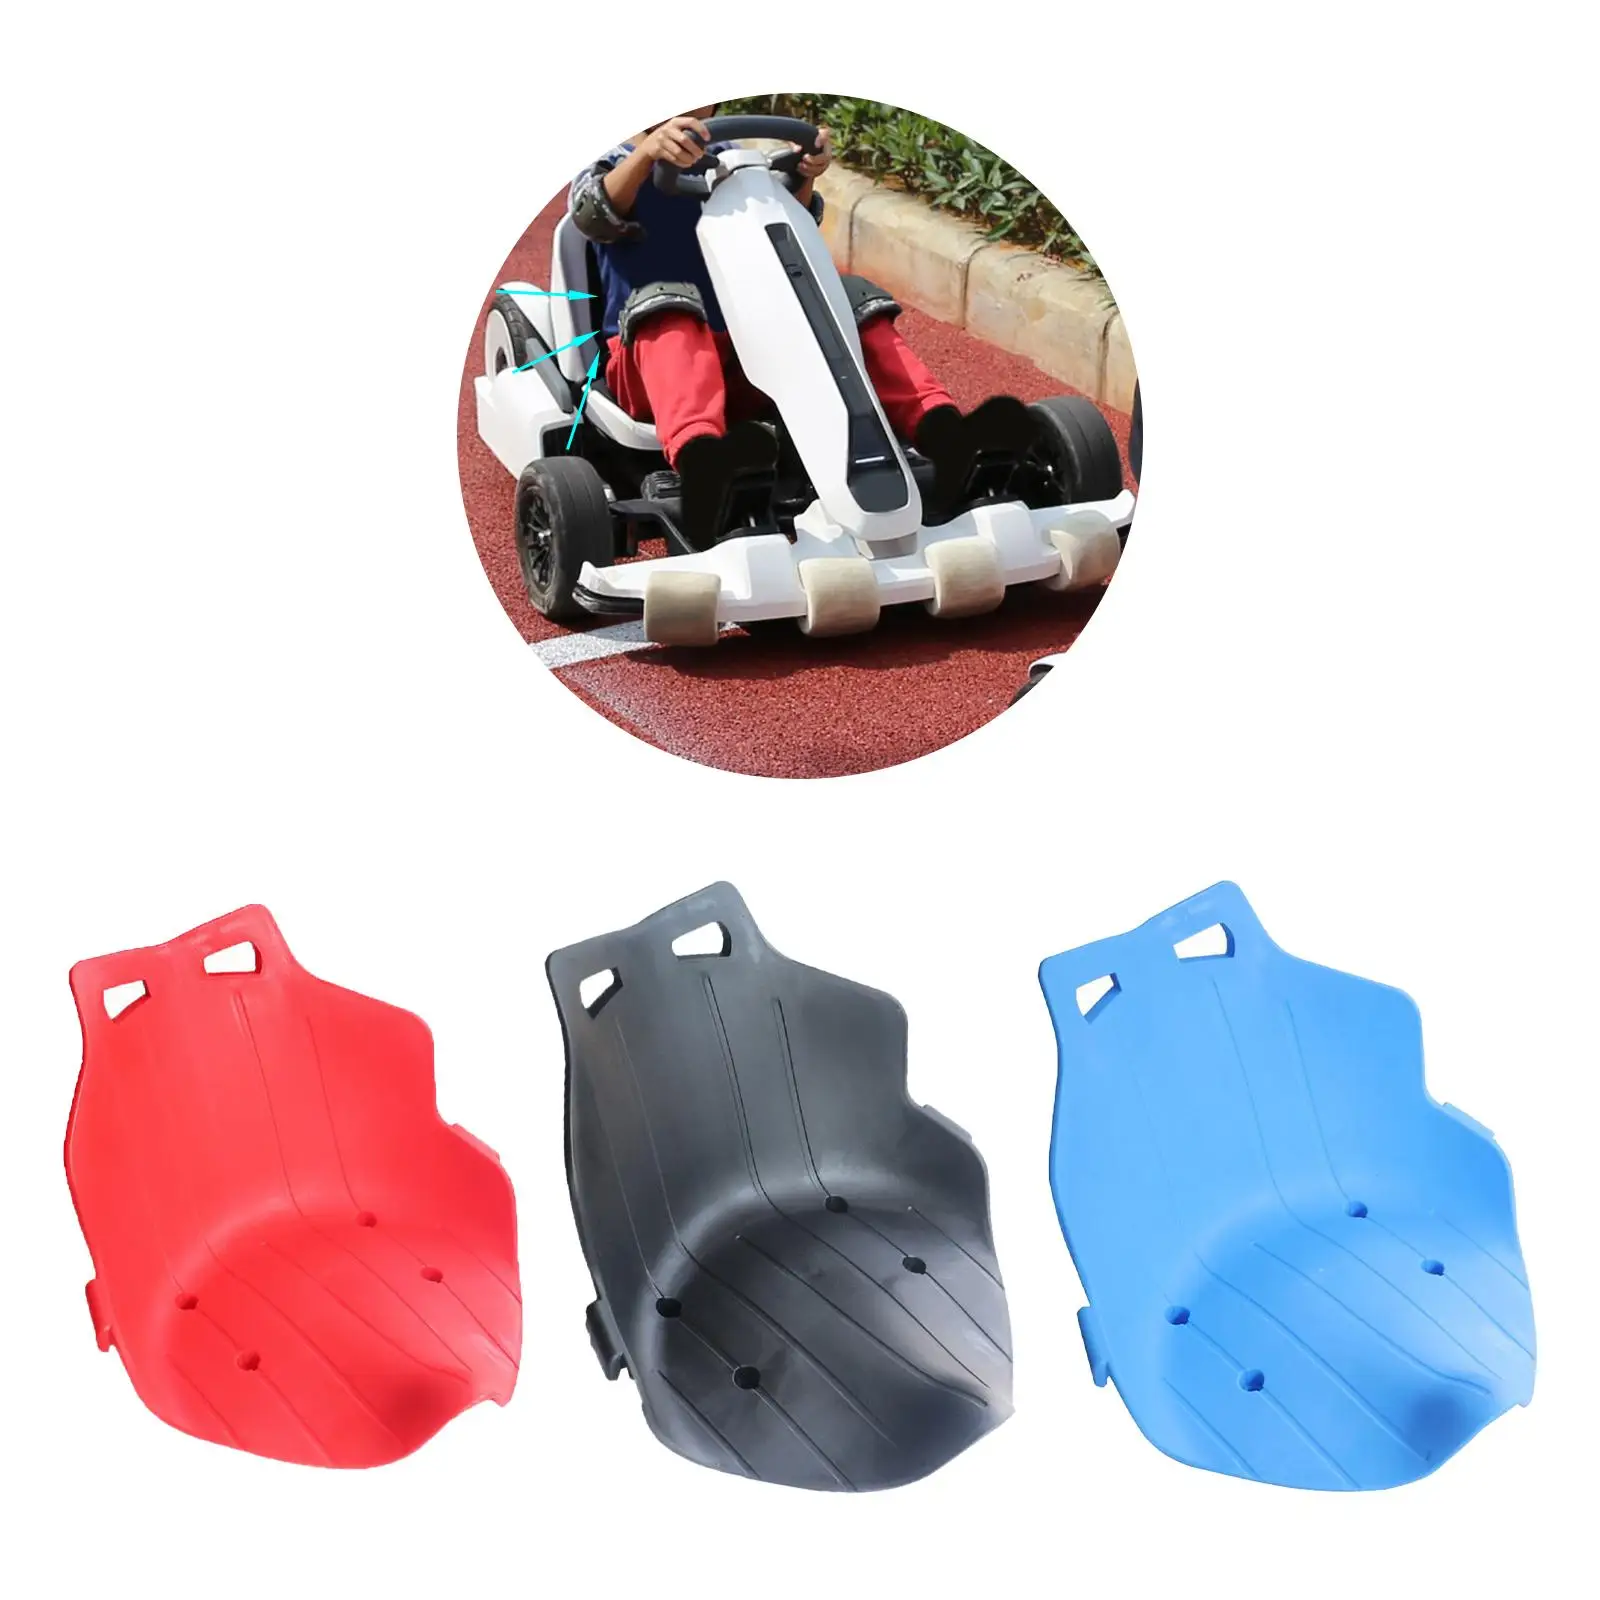 Kids Seat Attachment DIY for Drift Trike Racing Go Kart Car Seat Saddle Durable Low Back Accessory Kart Go Seat